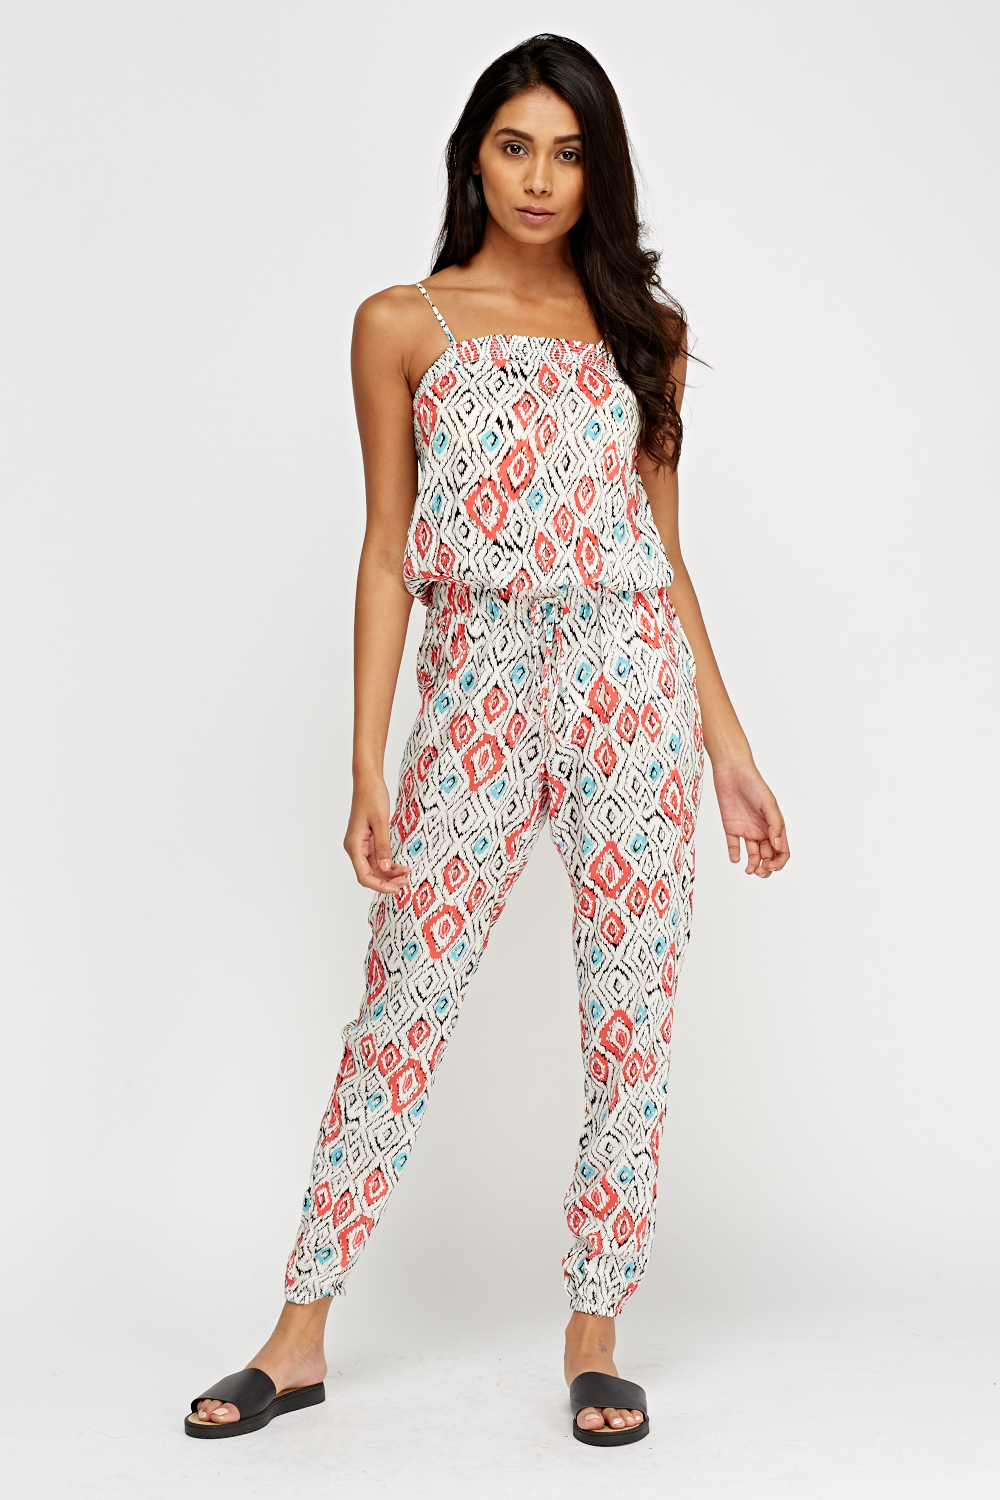 Printed White Jumpsuit - Just $7